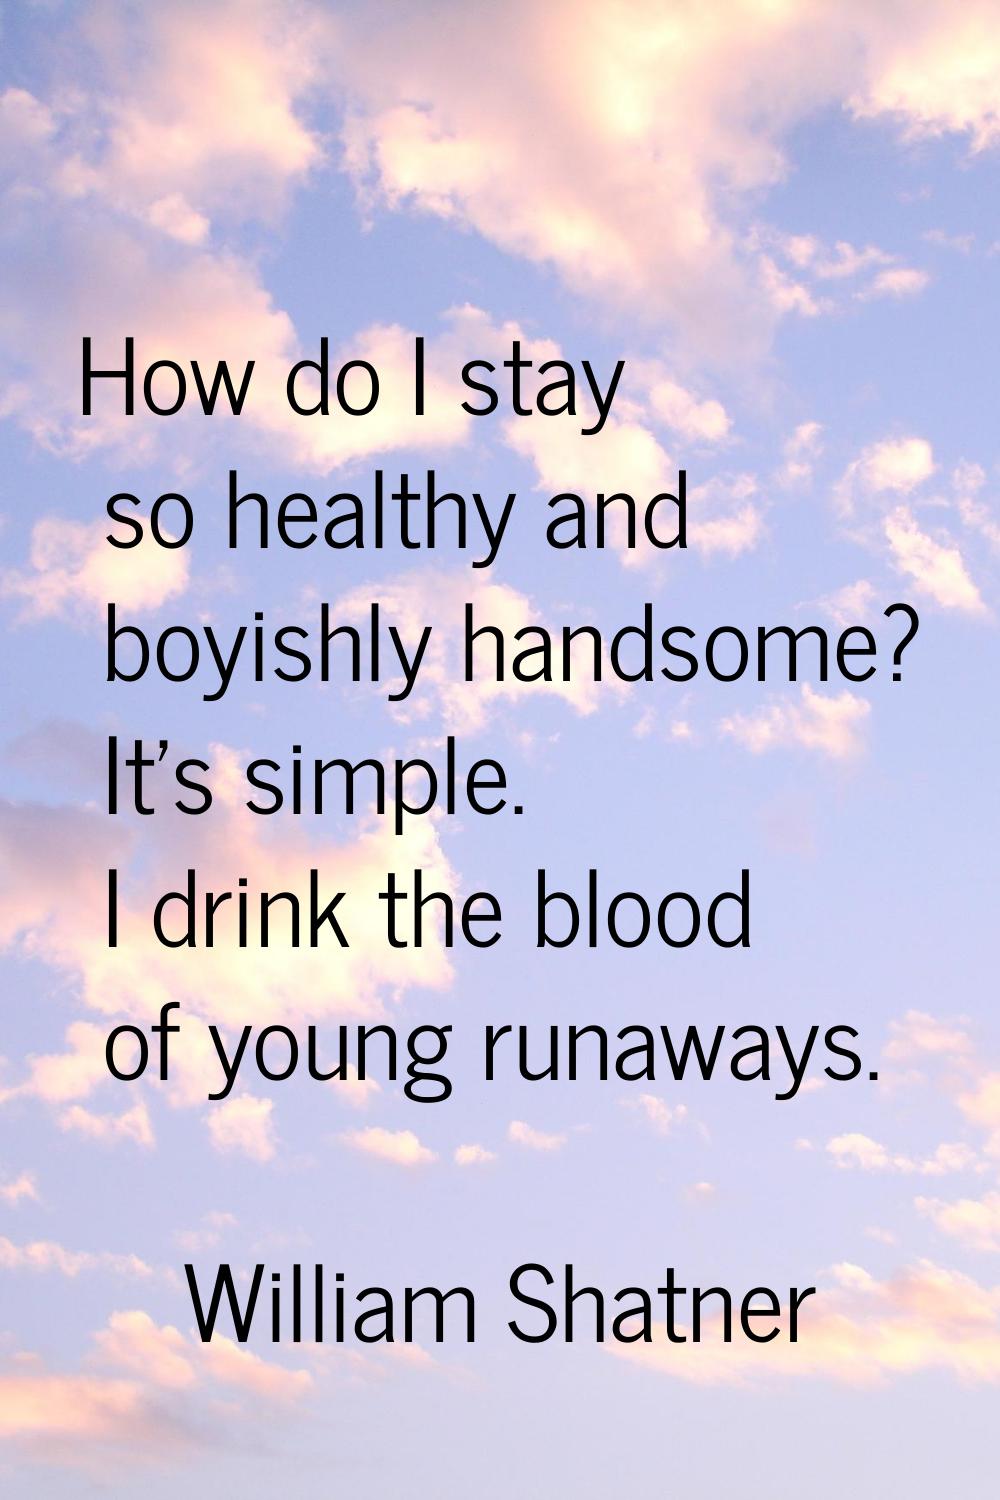 How do I stay so healthy and boyishly handsome? It's simple. I drink the blood of young runaways.